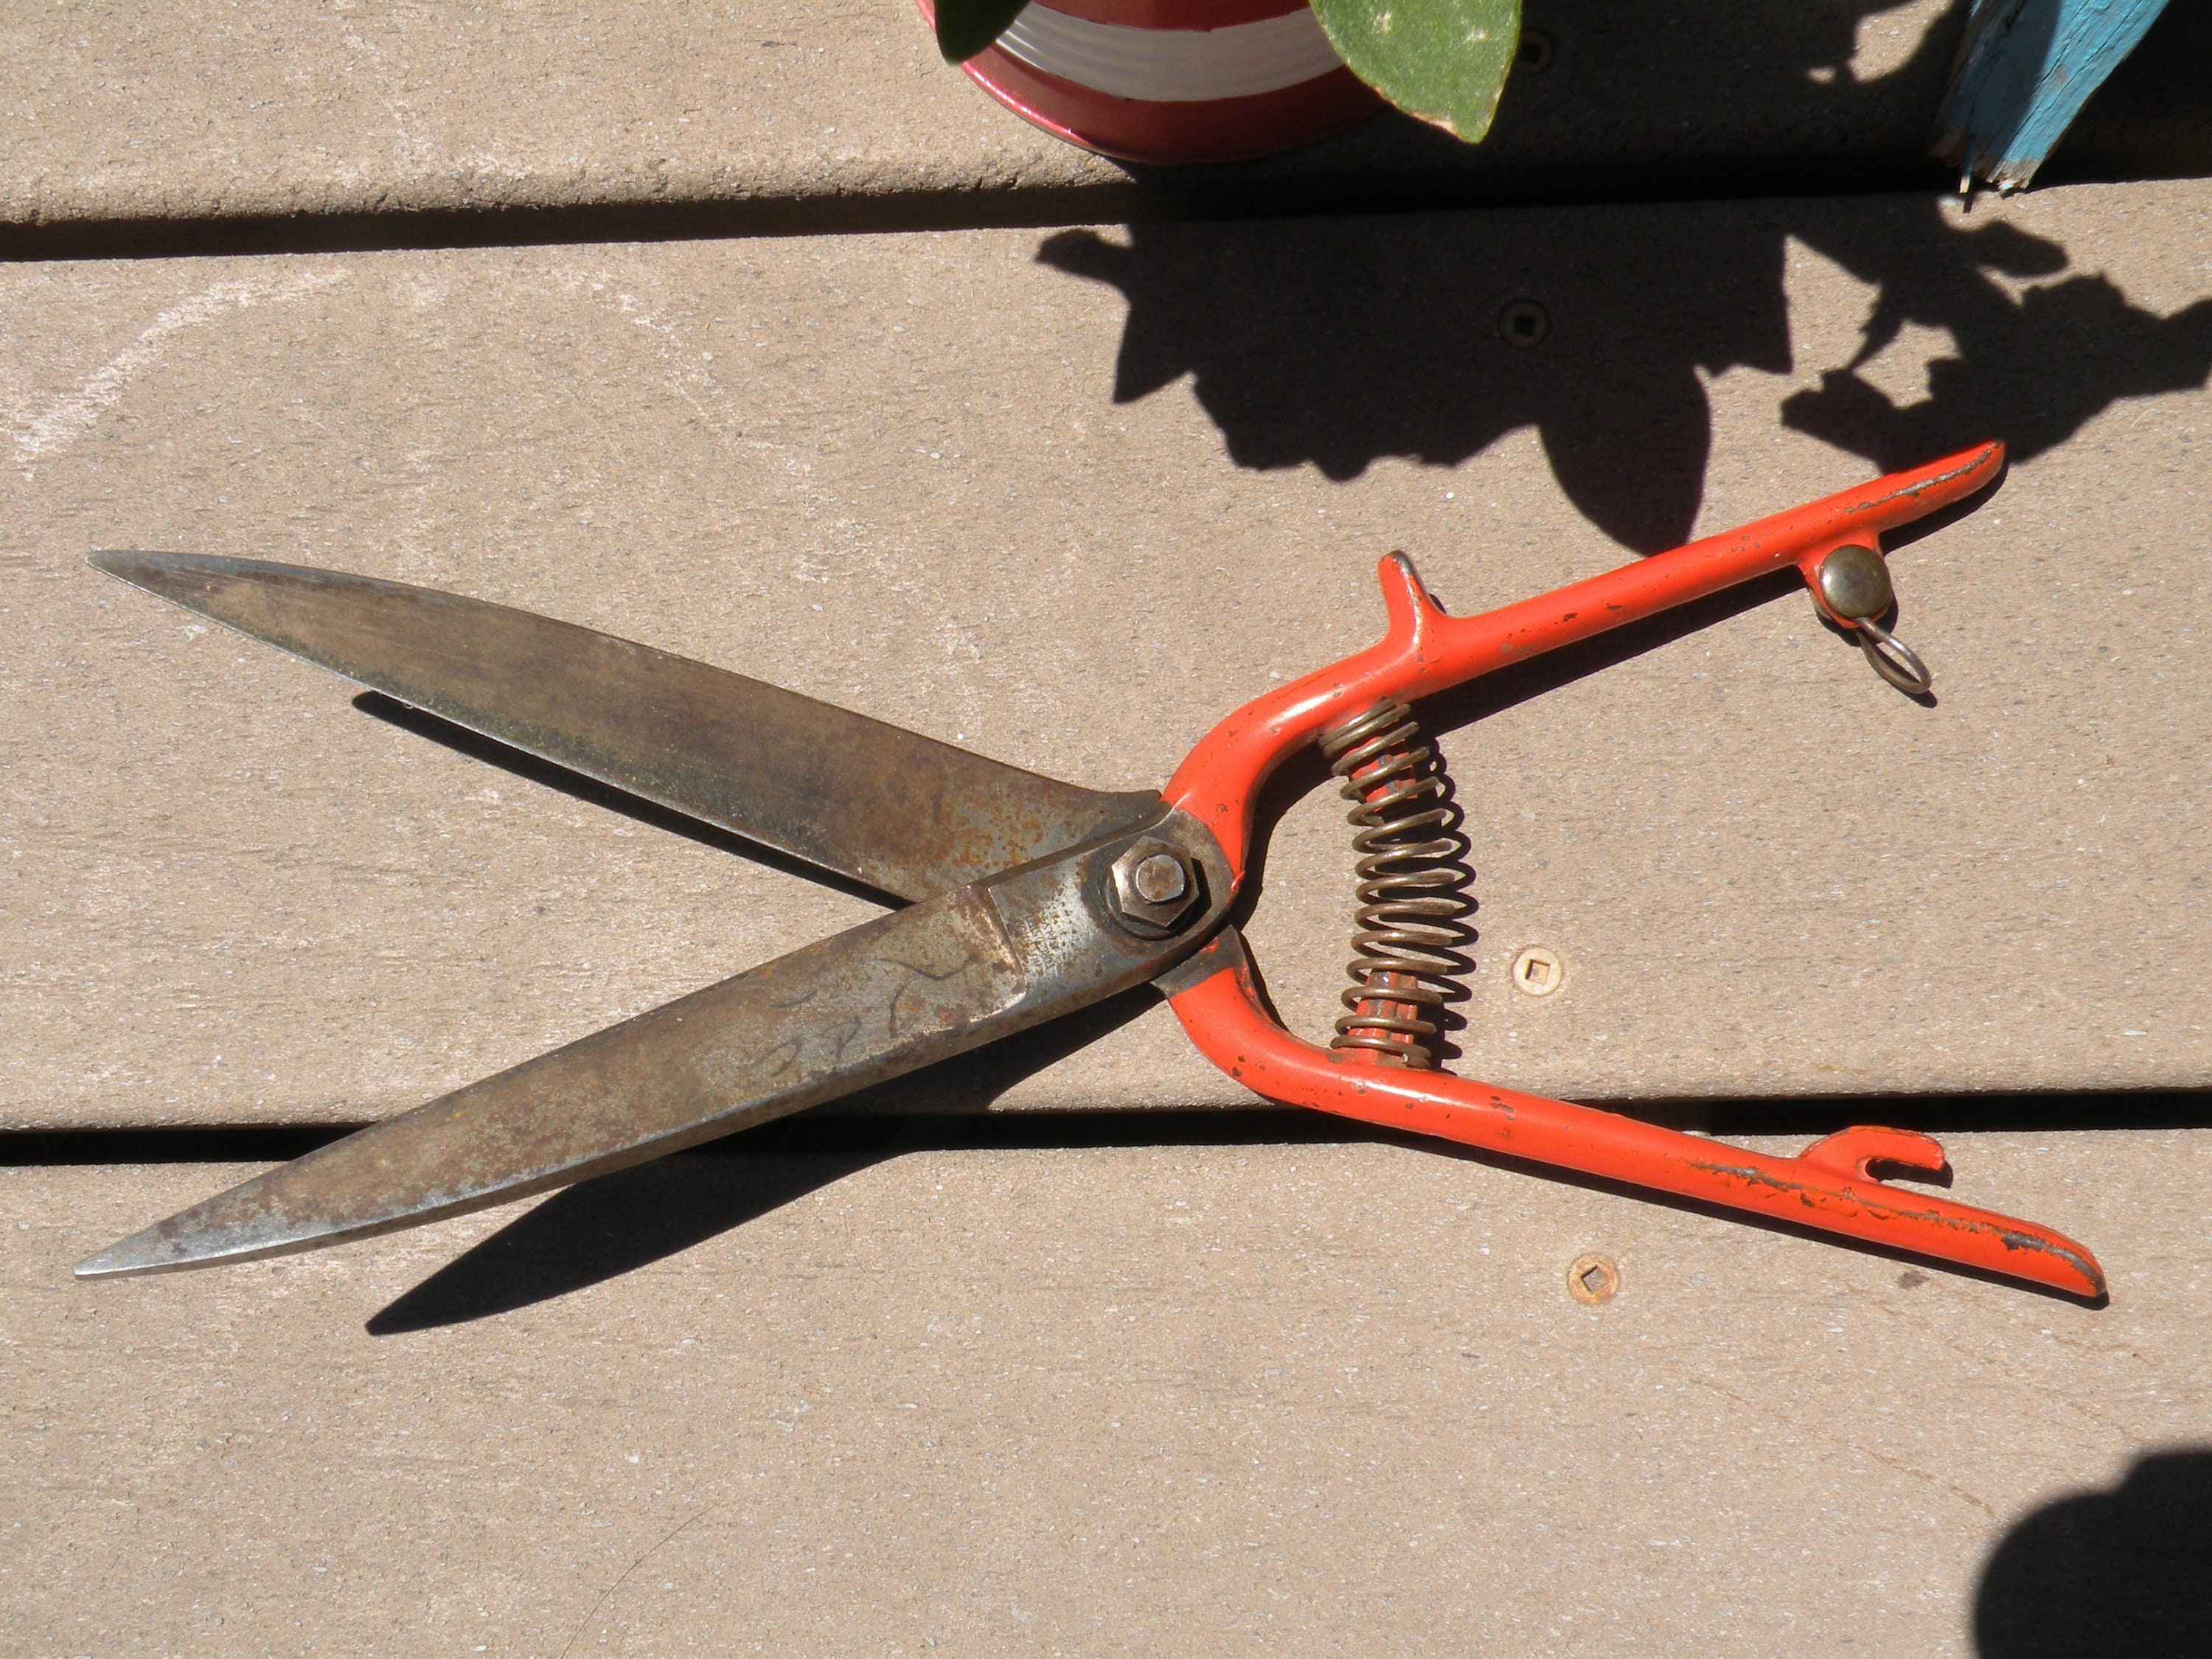 Rusty Garden Shears, Rustic Shears, Old Grass Clippers, Vintage